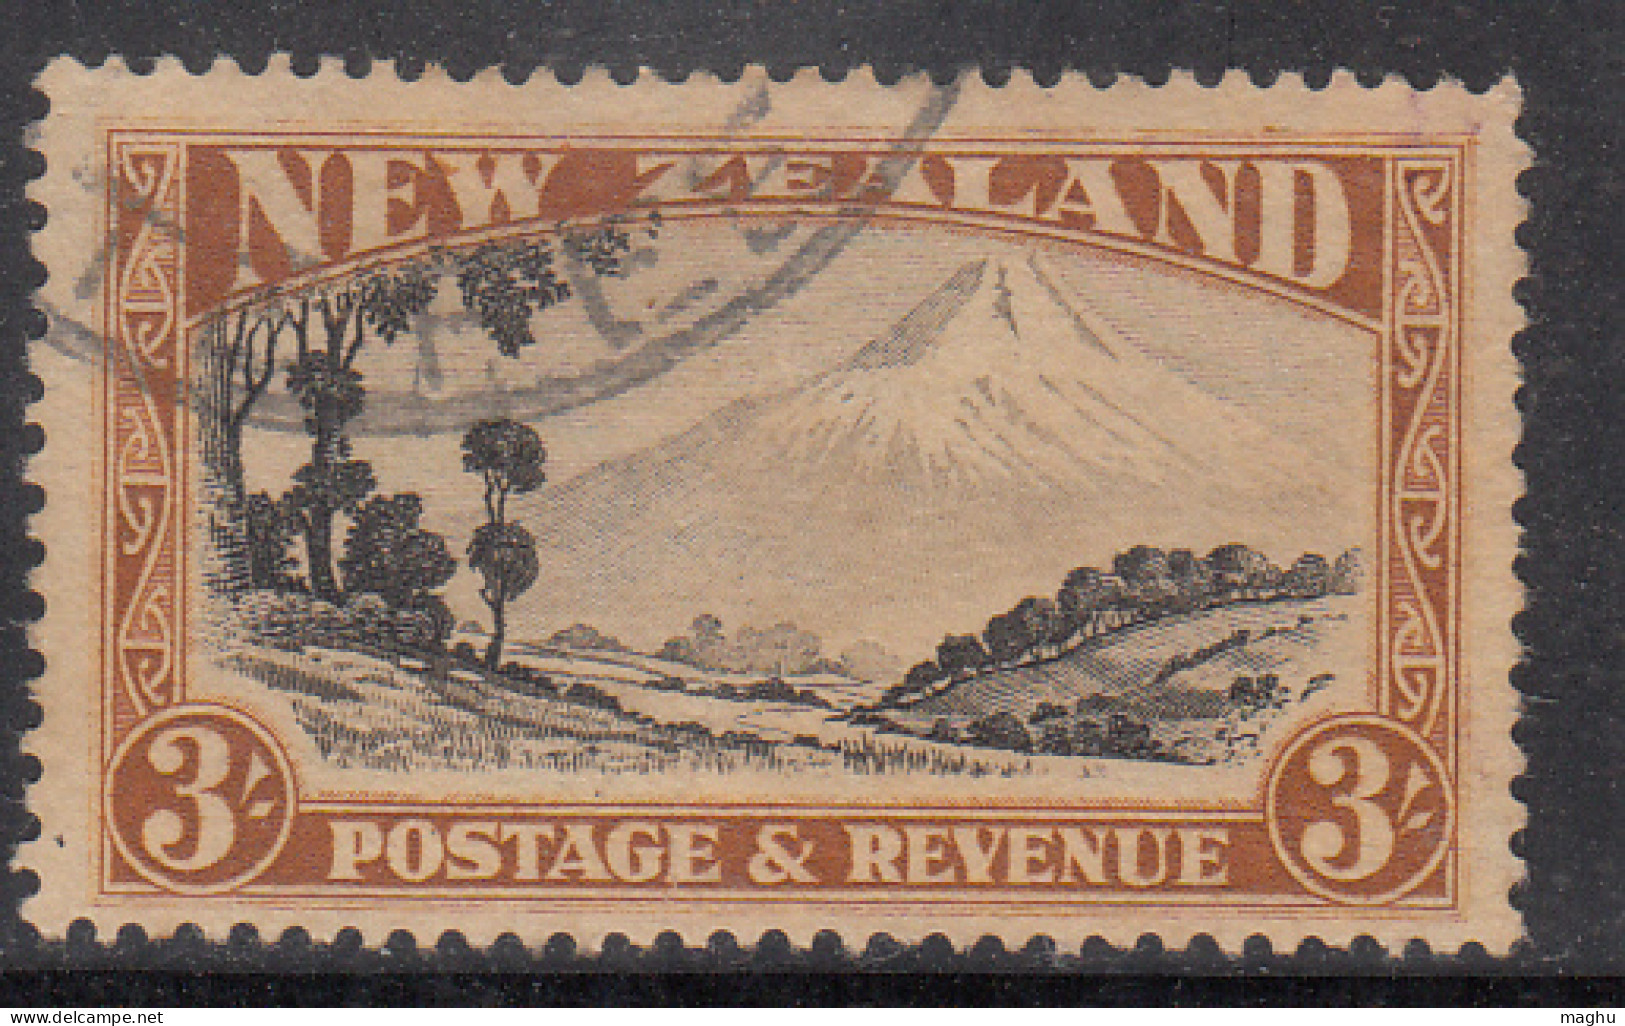 3s Used Mt Egmount, New Zealand 1936 - Used Stamps